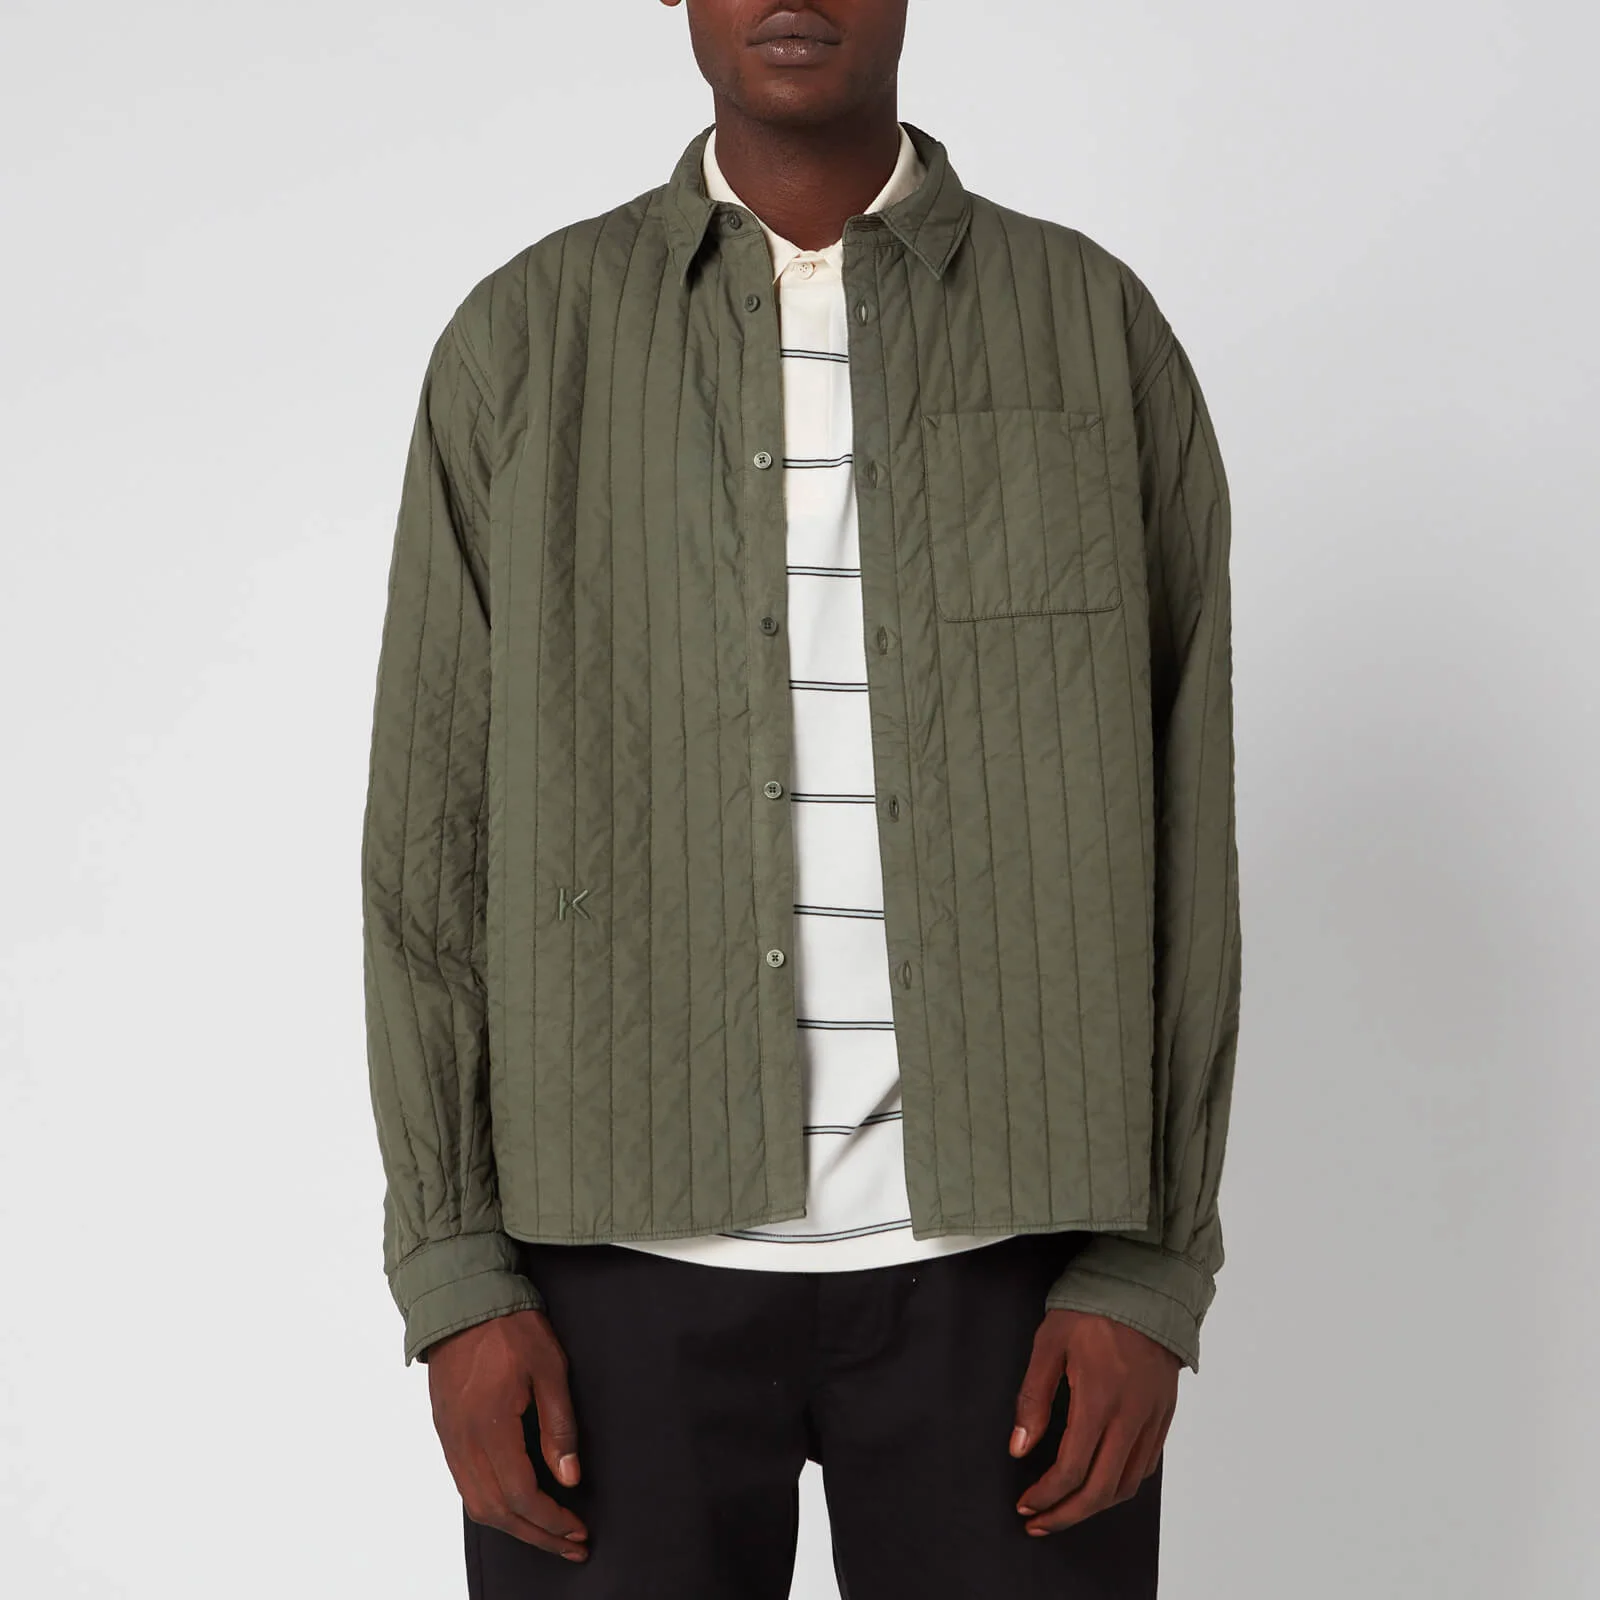 KENZO Men's Quilted Shirt - Fern Image 1